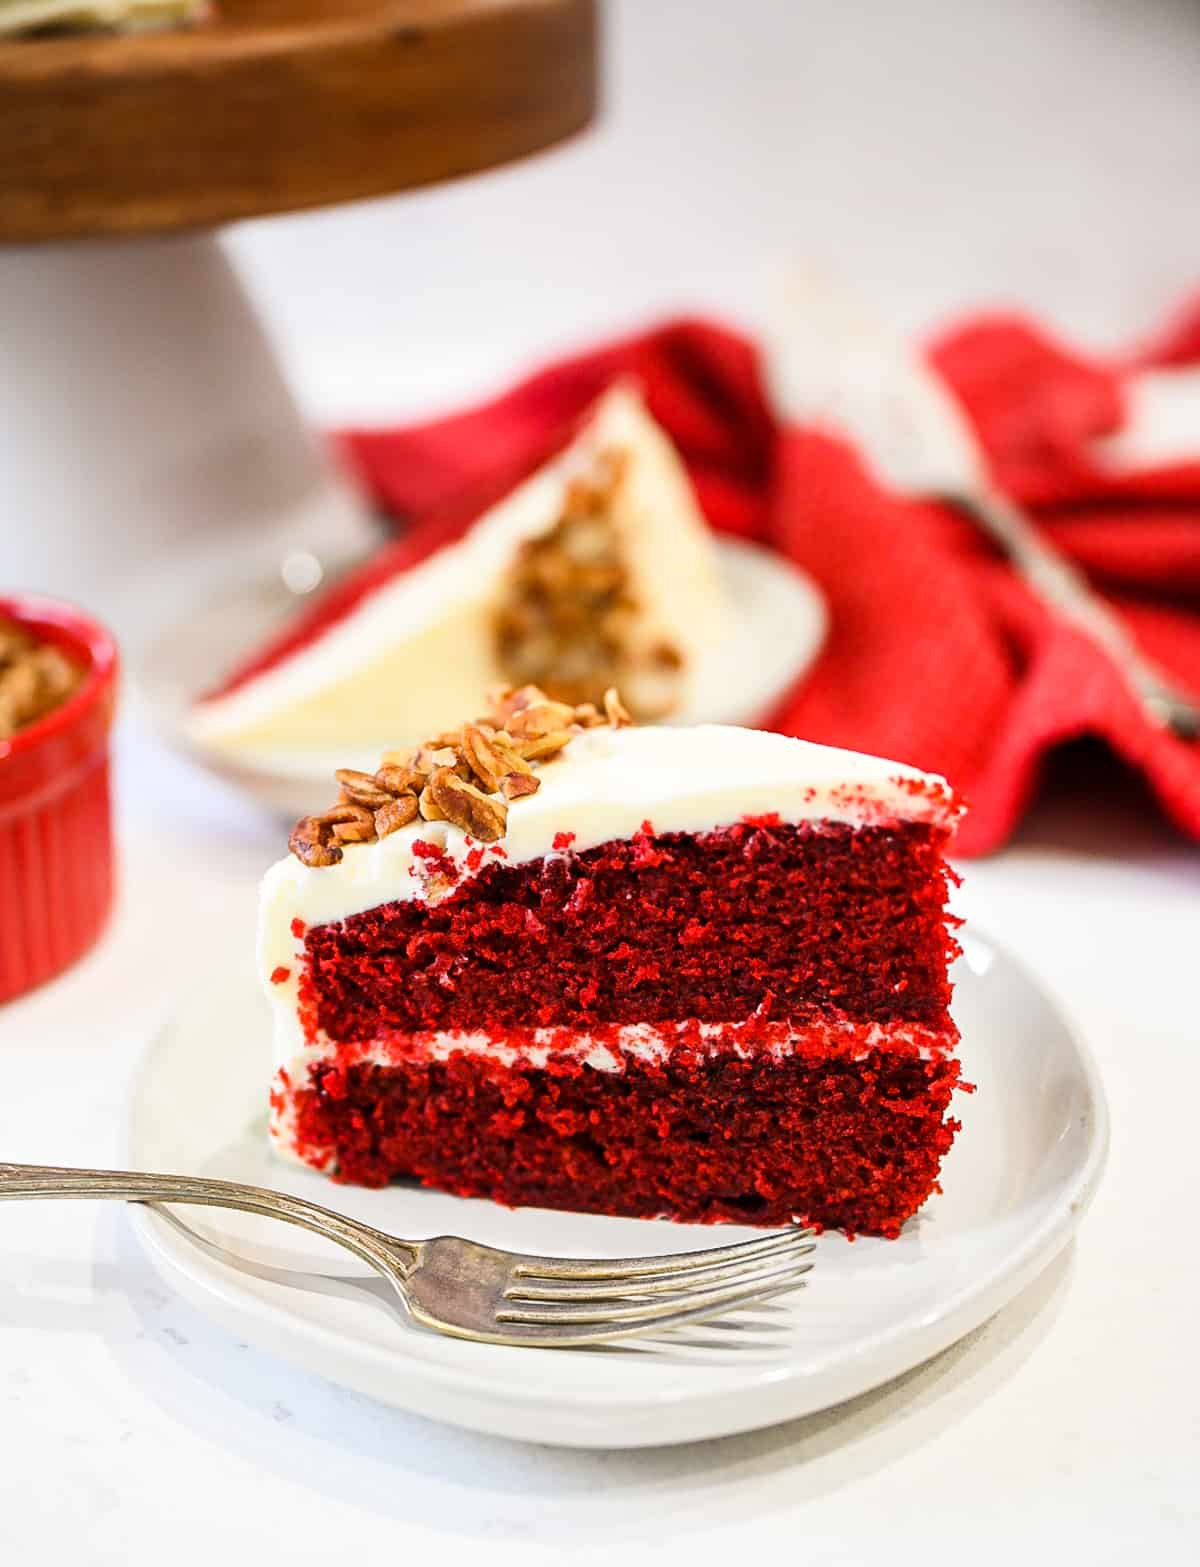 Up close image of classic red velvet cake with another slice in background set on a red cloth with cake server.